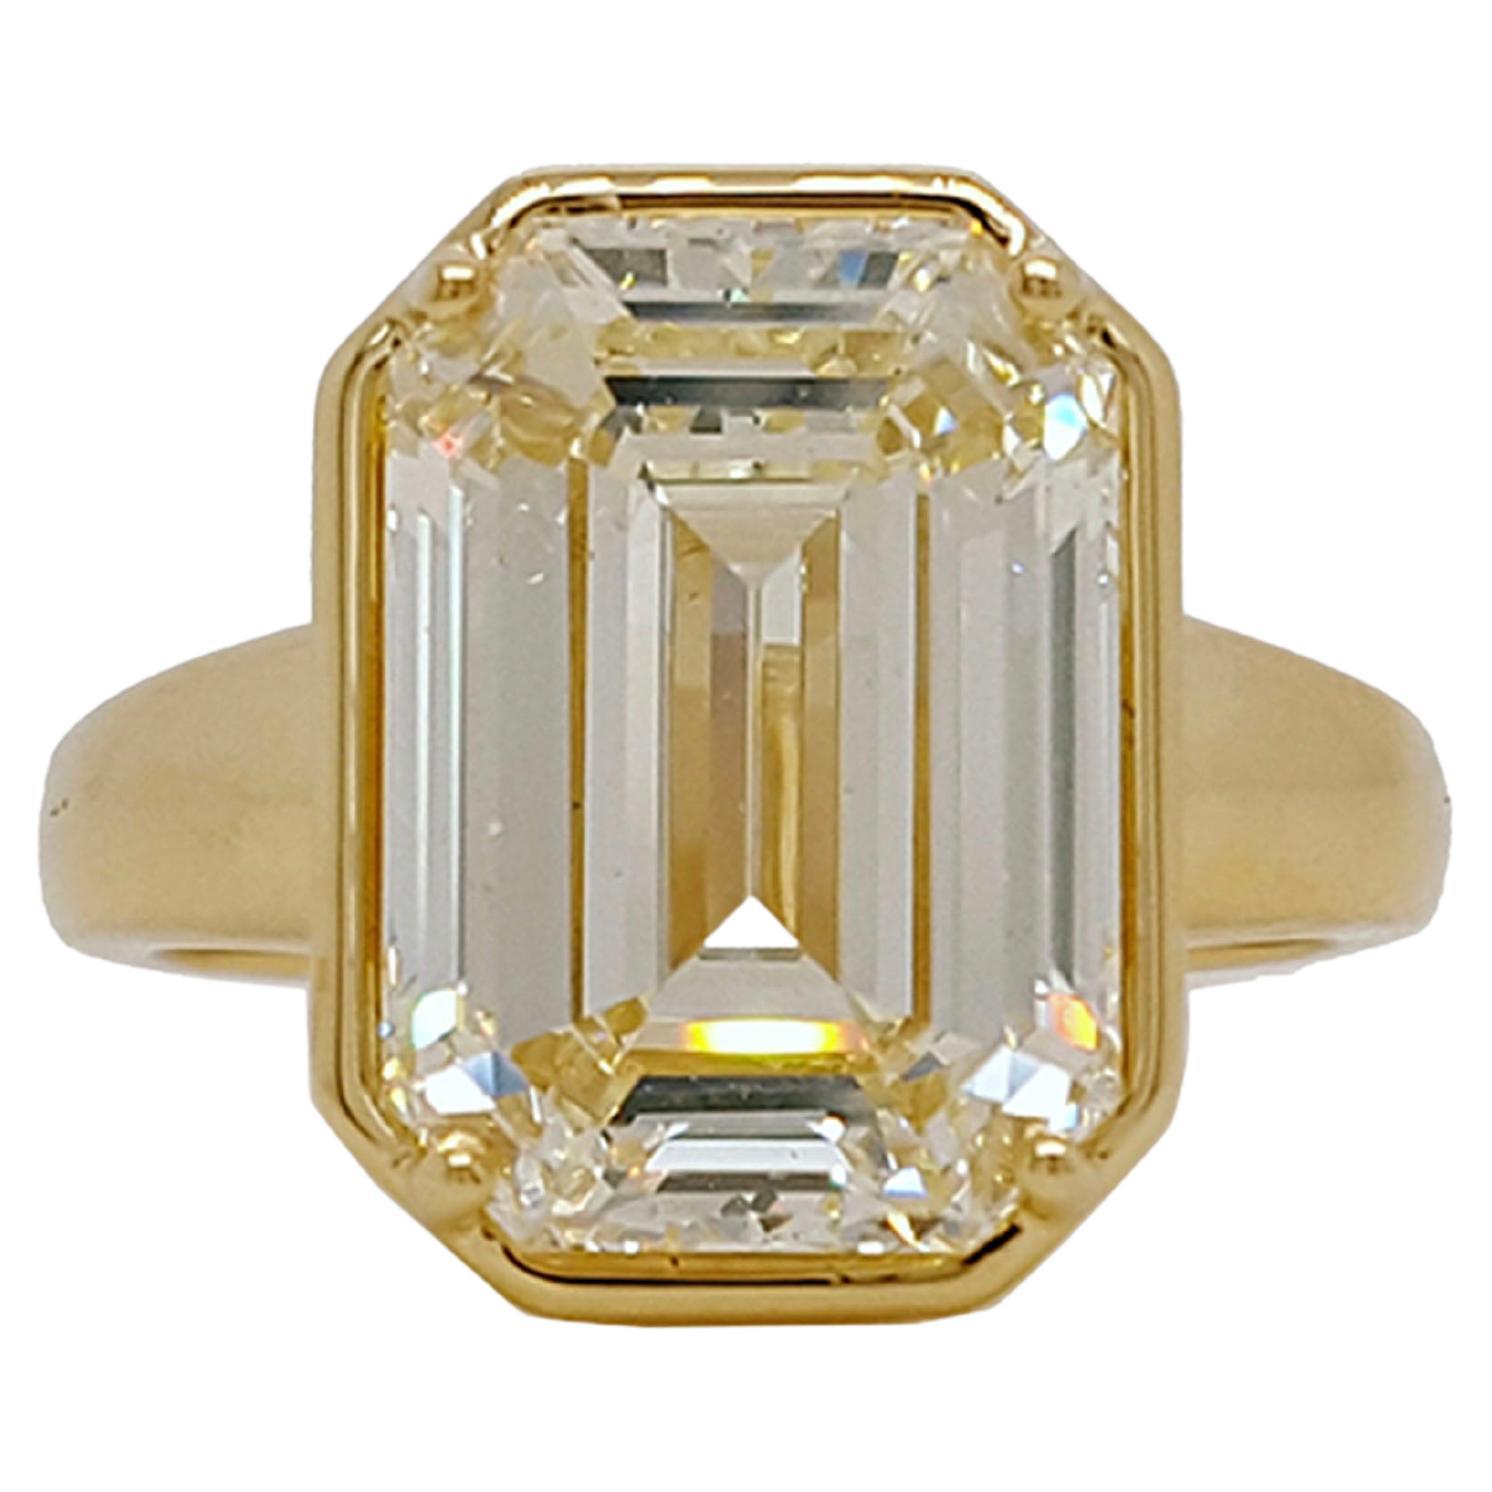 7.50 Carat Emerald Cut Diamond Set in 18K Gold Bezel Engagement Ring GIA Report For Sale